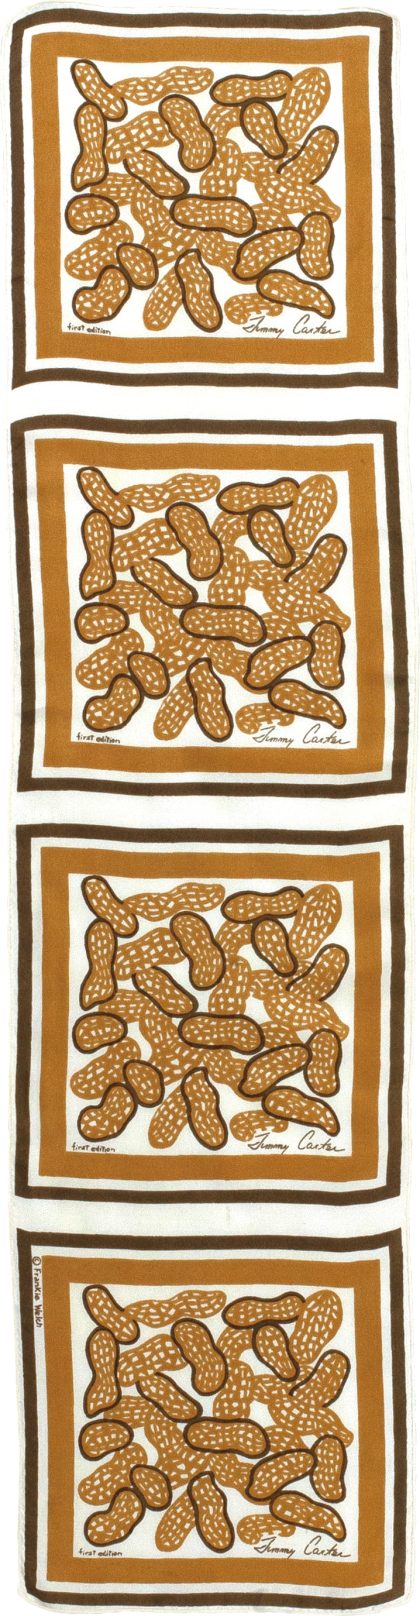 Frankie Welch Peanut scarf for Governor and Mrs. Jimmy Carter, 1973, silk